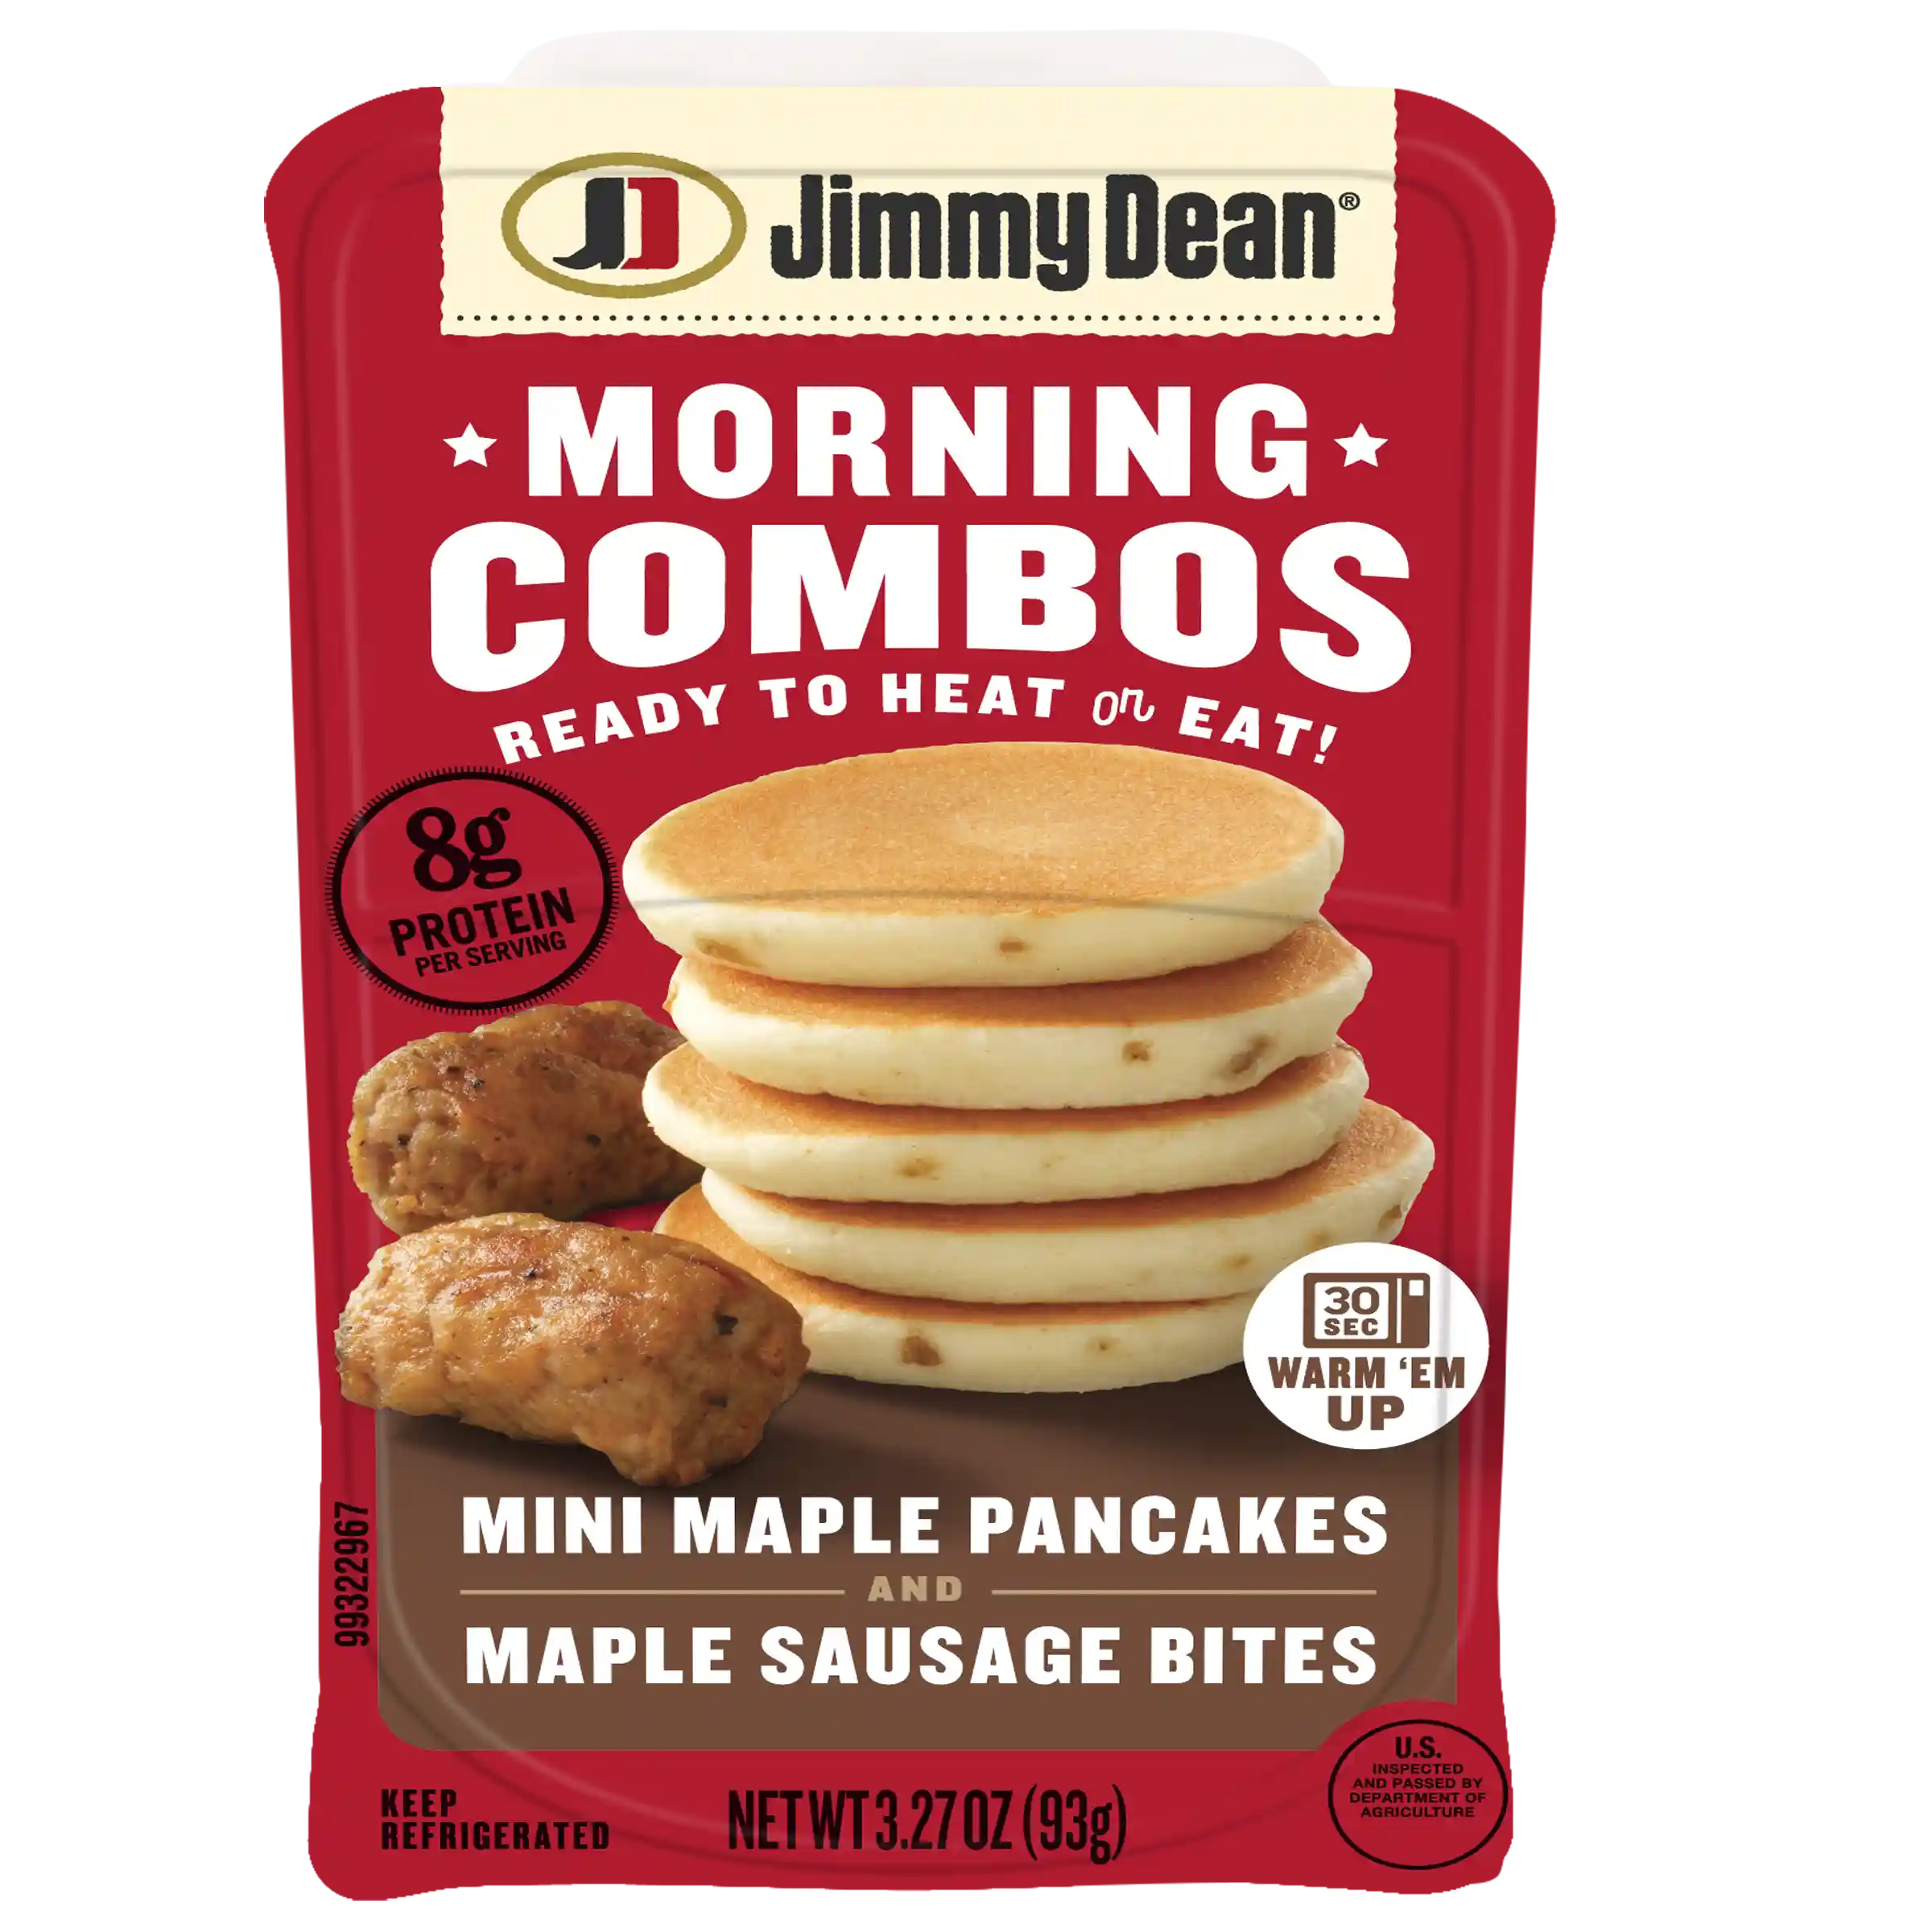 Jimmy Dean® Morning Combos, Mini Maple Pancakes and Maple Sausage Bites